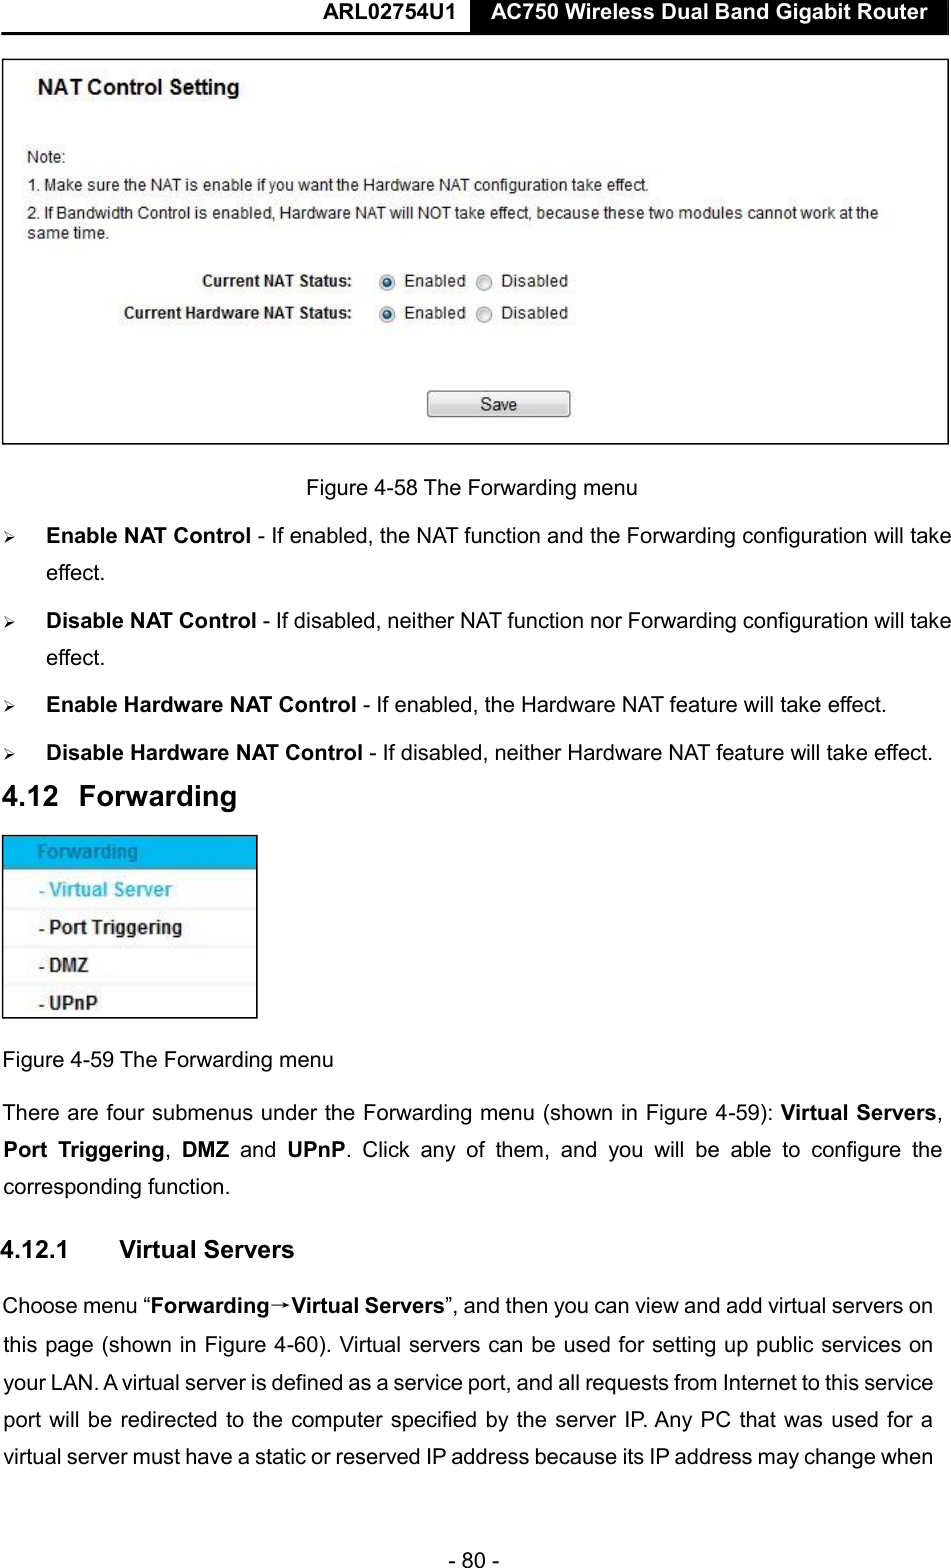  ARL02754U1  AC750 Wireless Dual Band Gigabit Router    - 80 -   Figure 4-58 The Forwarding menu   Enable NAT Control - If enabled, the NAT function and the Forwarding configuration will take effect.    Disable NAT Control - If disabled, neither NAT function nor Forwarding configuration will take effect.    Enable Hardware NAT Control - If enabled, the Hardware NAT feature will take effect.    Disable Hardware NAT Control - If disabled, neither Hardware NAT feature will take effect.    Figure 4-59 The Forwarding menu  There are four submenus under the Forwarding menu (shown in Figure 4-59): Virtual Servers, Port  Triggering,  DMZ  and  UPnP.  Click  any  of  them,  and  you  will  be  able  to  configure  the corresponding function.  4.12.1  Virtual Servers  Choose menu “Forwarding→Virtual Servers”, and then you can view and add virtual servers on this page (shown in Figure 4-60). Virtual servers can be used for setting up public services on your LAN. A virtual server is defined as a service port, and all requests from Internet to this service port will be redirected to the computer specified by the server IP. Any PC that was used for a virtual server must have a static or reserved IP address because its IP address may change when   4.12   Forwarding    